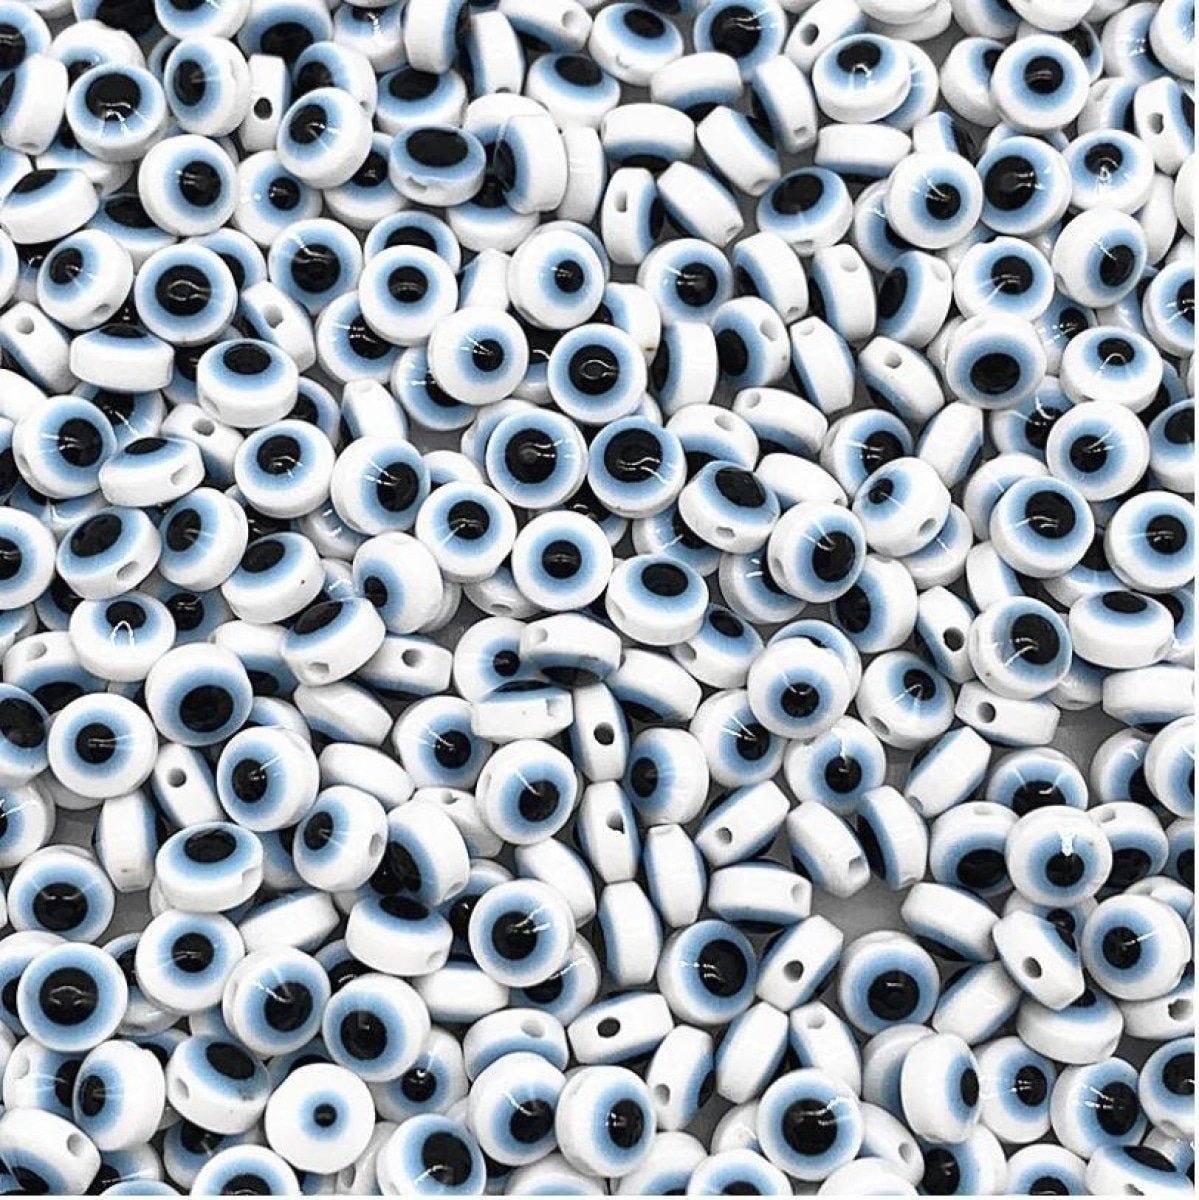 48pcs 8/10mm Oval Resin Spacer Beads Double Sided Eyes for Jewellery Making DIY Bracelet Beads Set B - White & Blue 8mm - Asia Sell